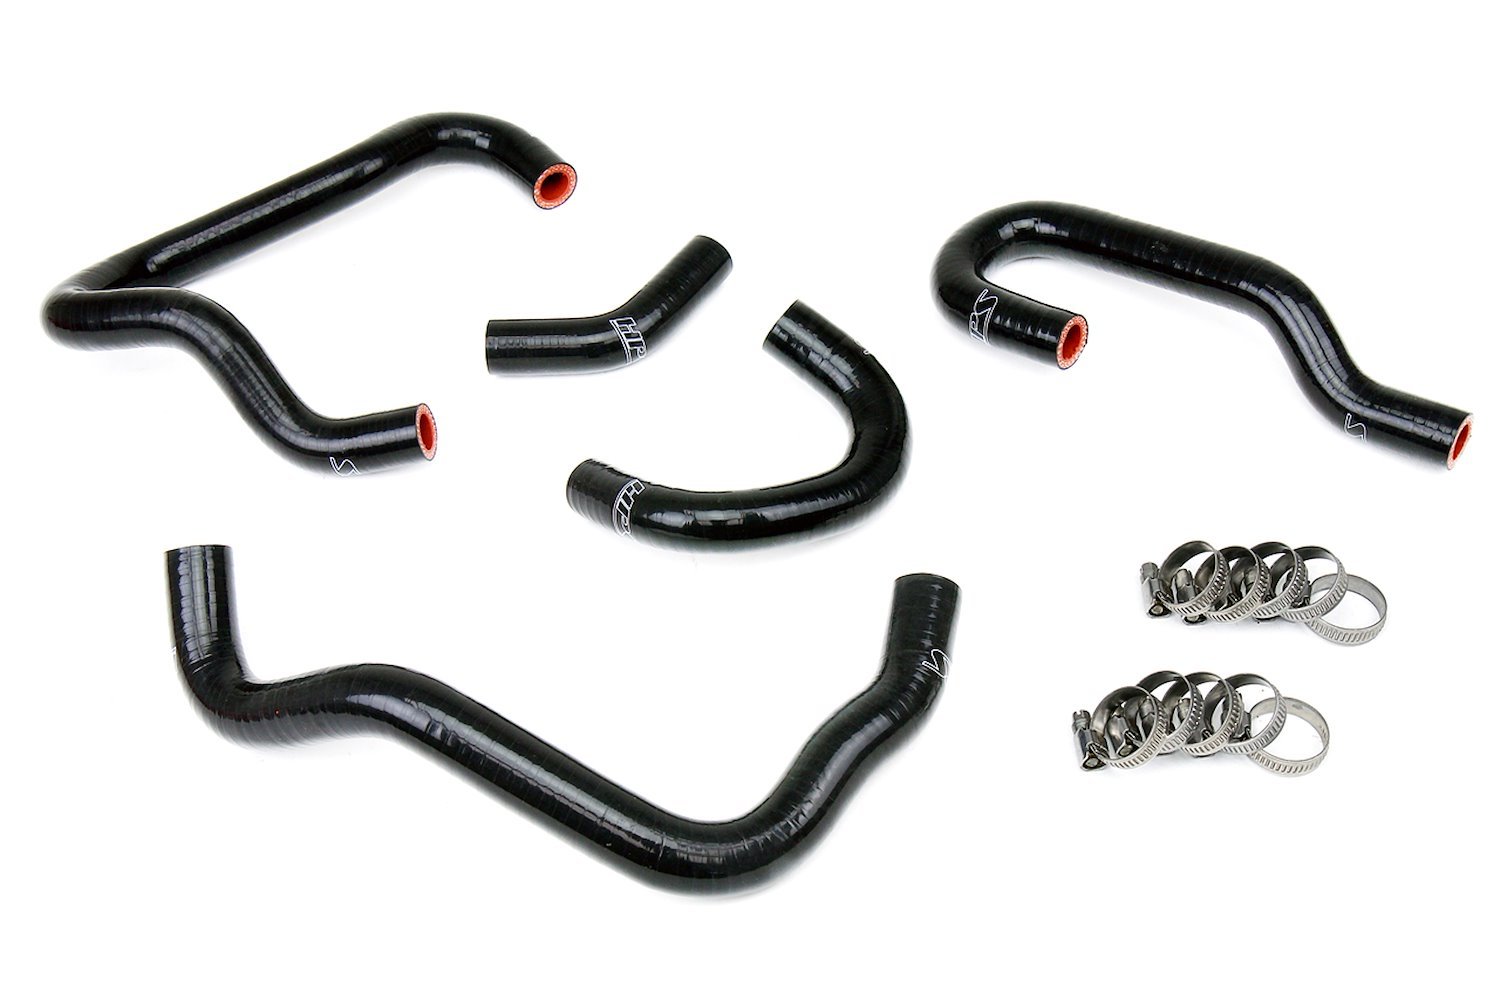 57-1415-BLK Heater Hose Kit, High-Temp 3-Ply Reinforced Silicone, Replace OEM Rubber Heater Coolant Hoses